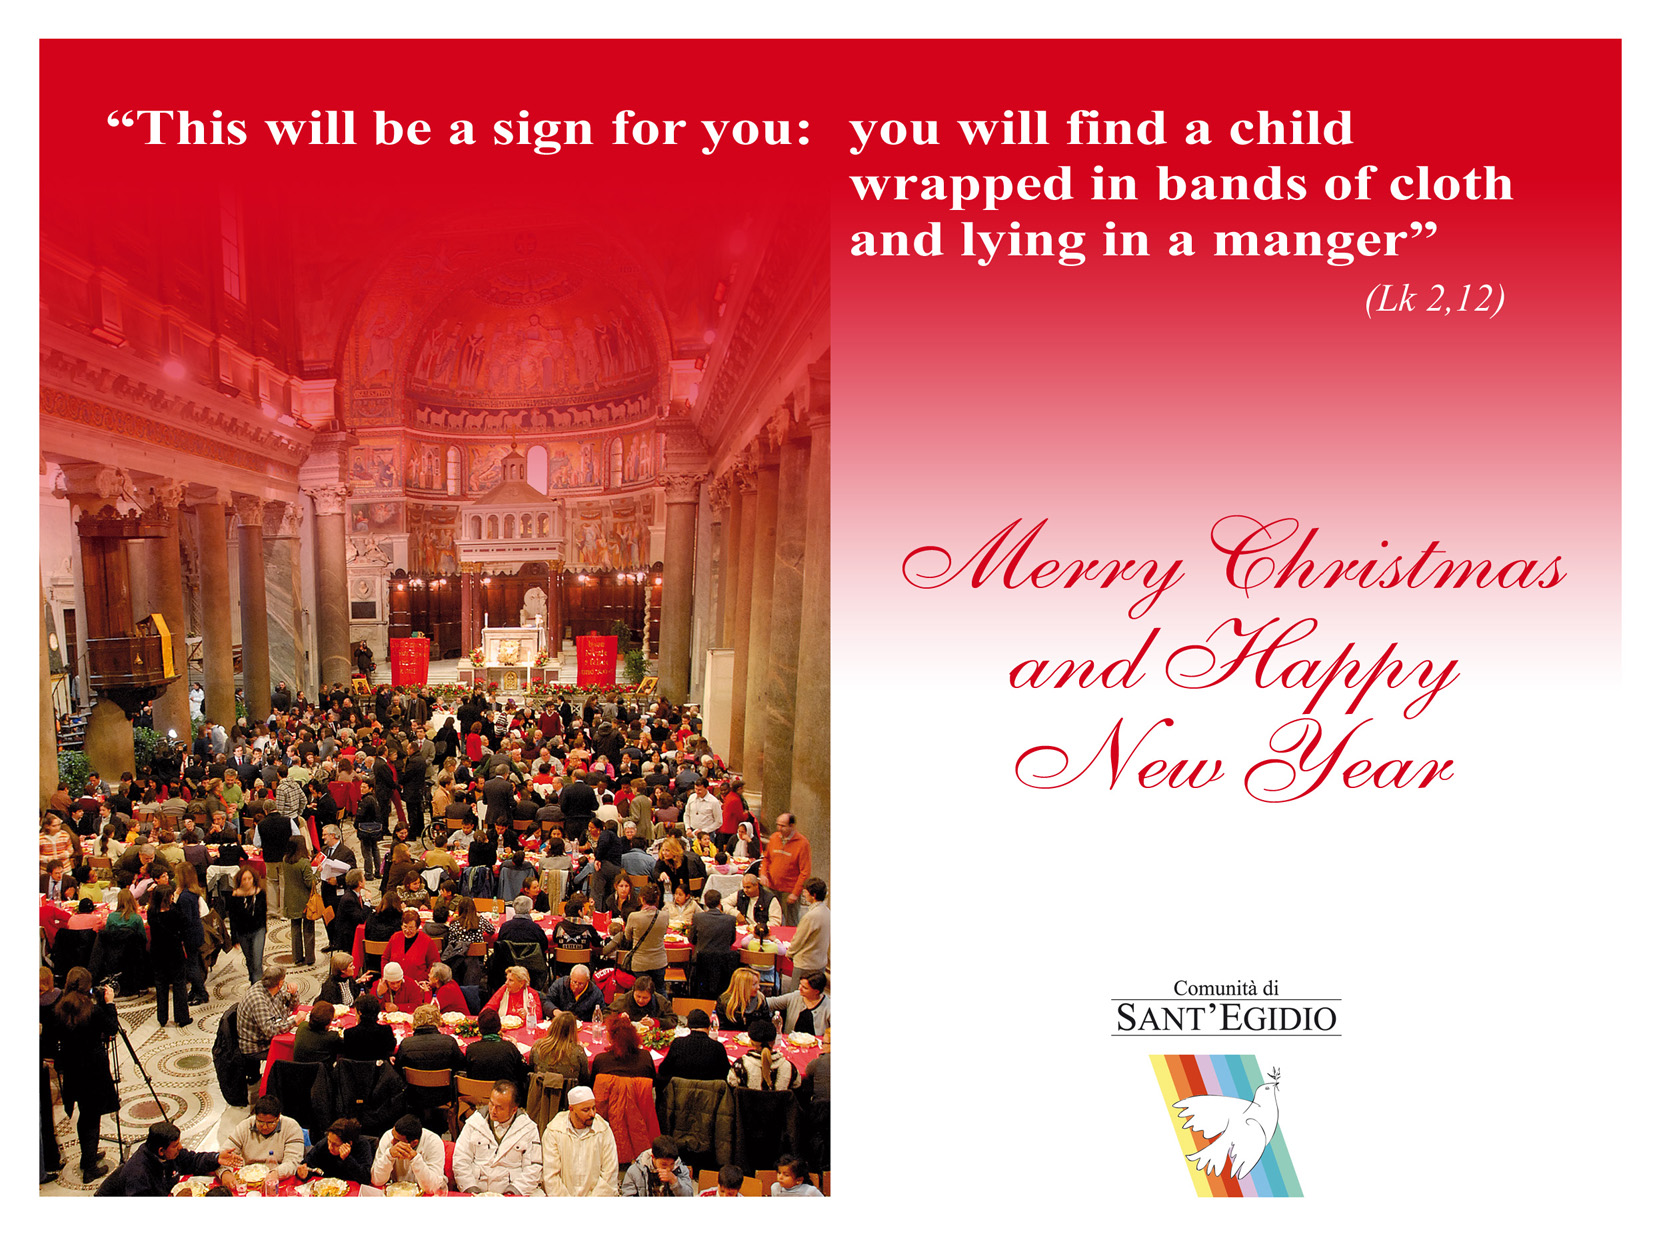 Christmas 2014 - Best wishes from the Community of Sant'Egidio